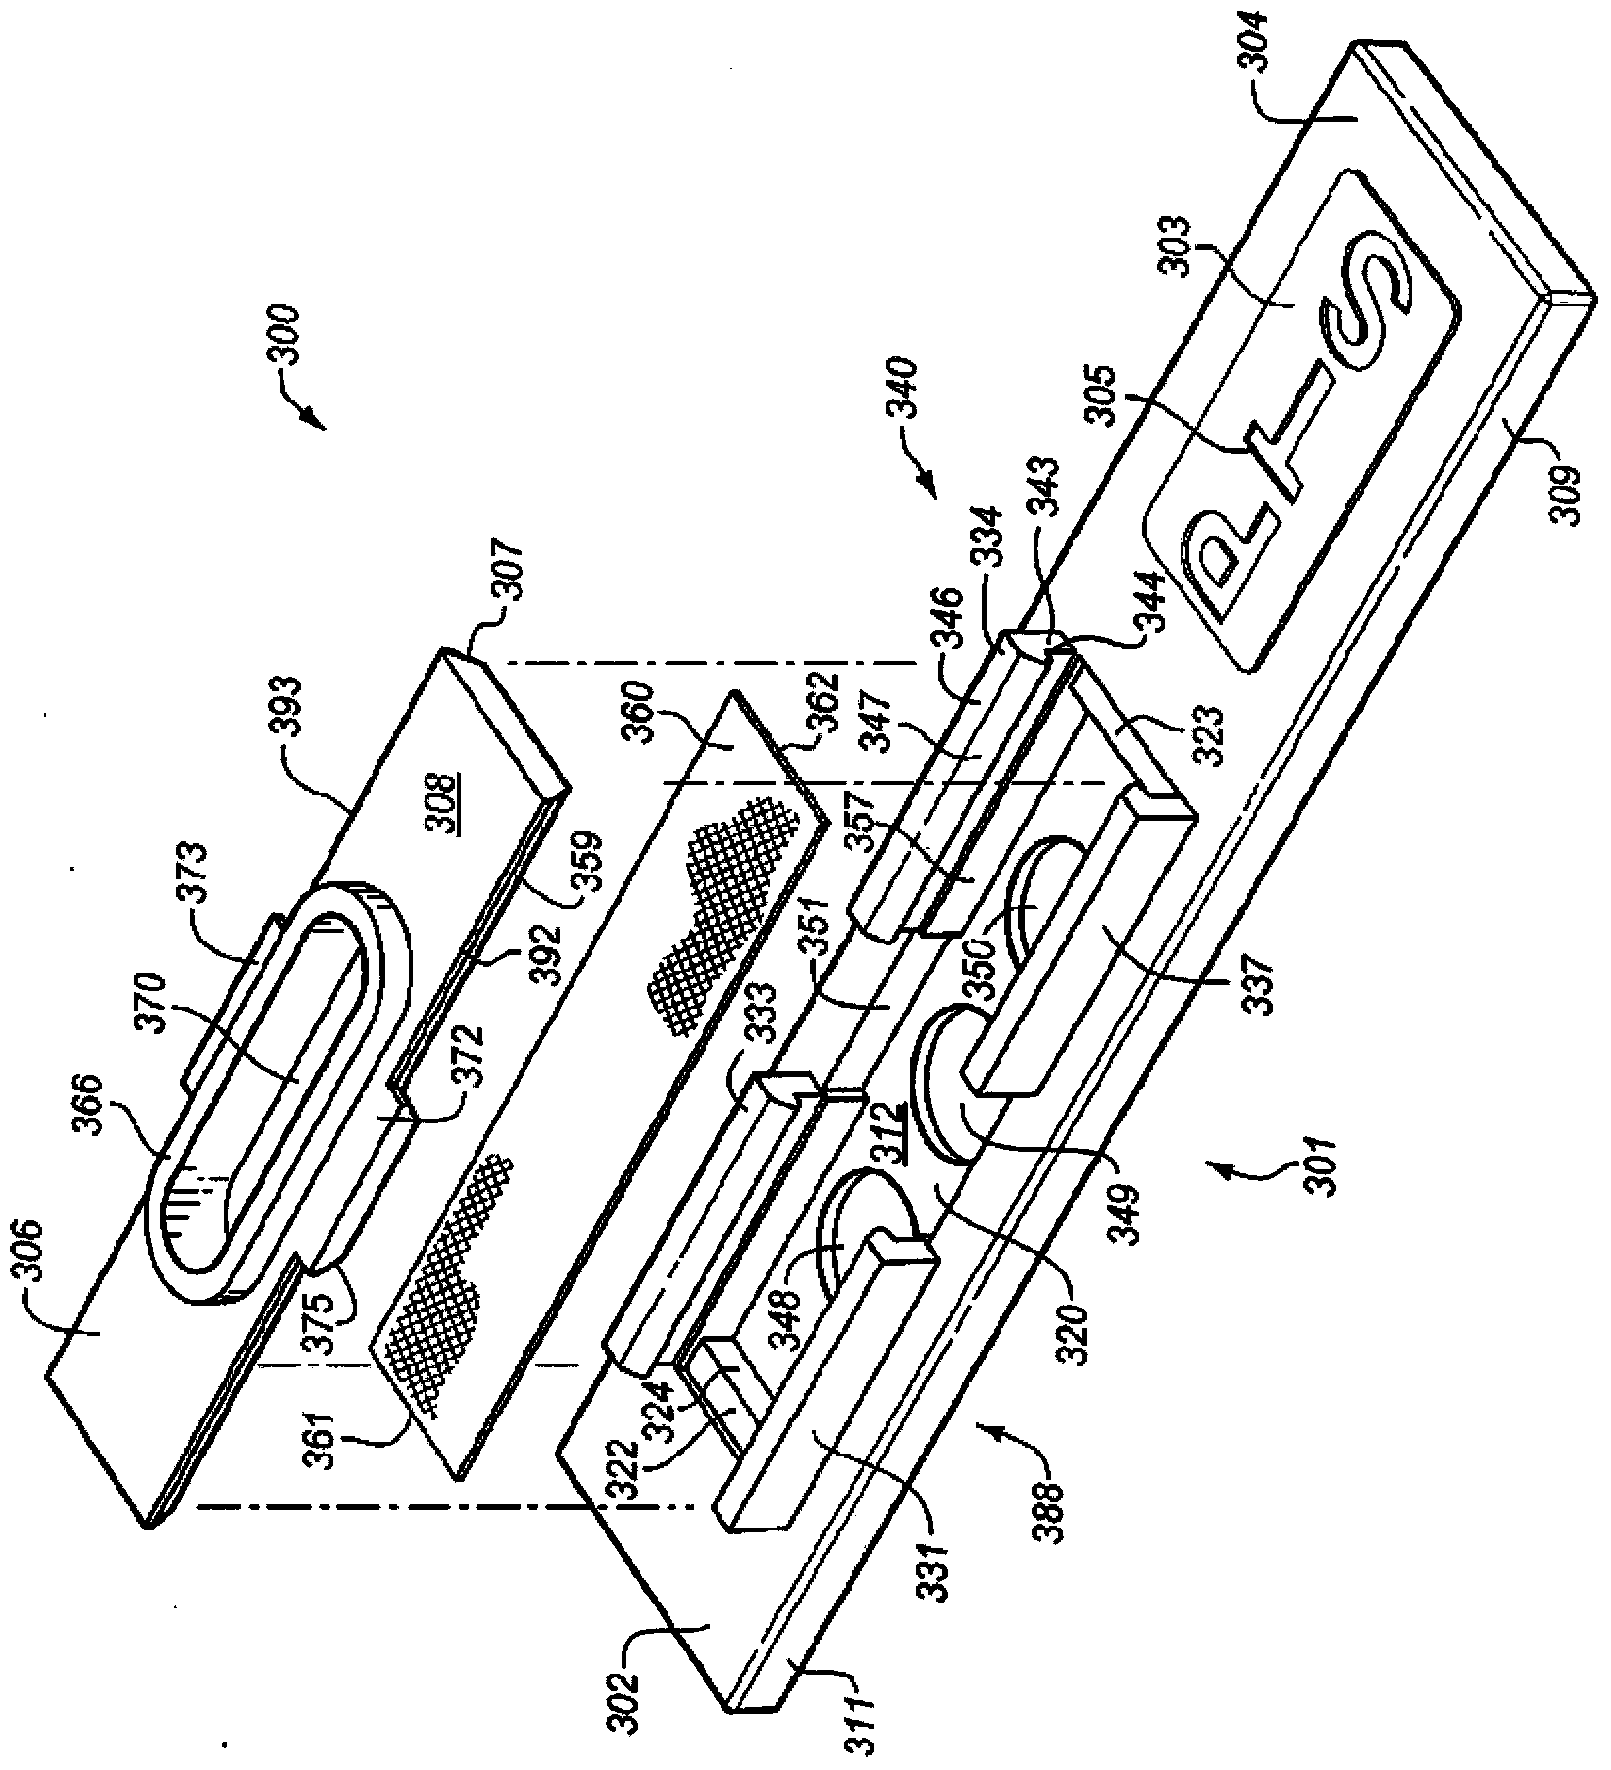 Blood separation system and method for a dry test strip